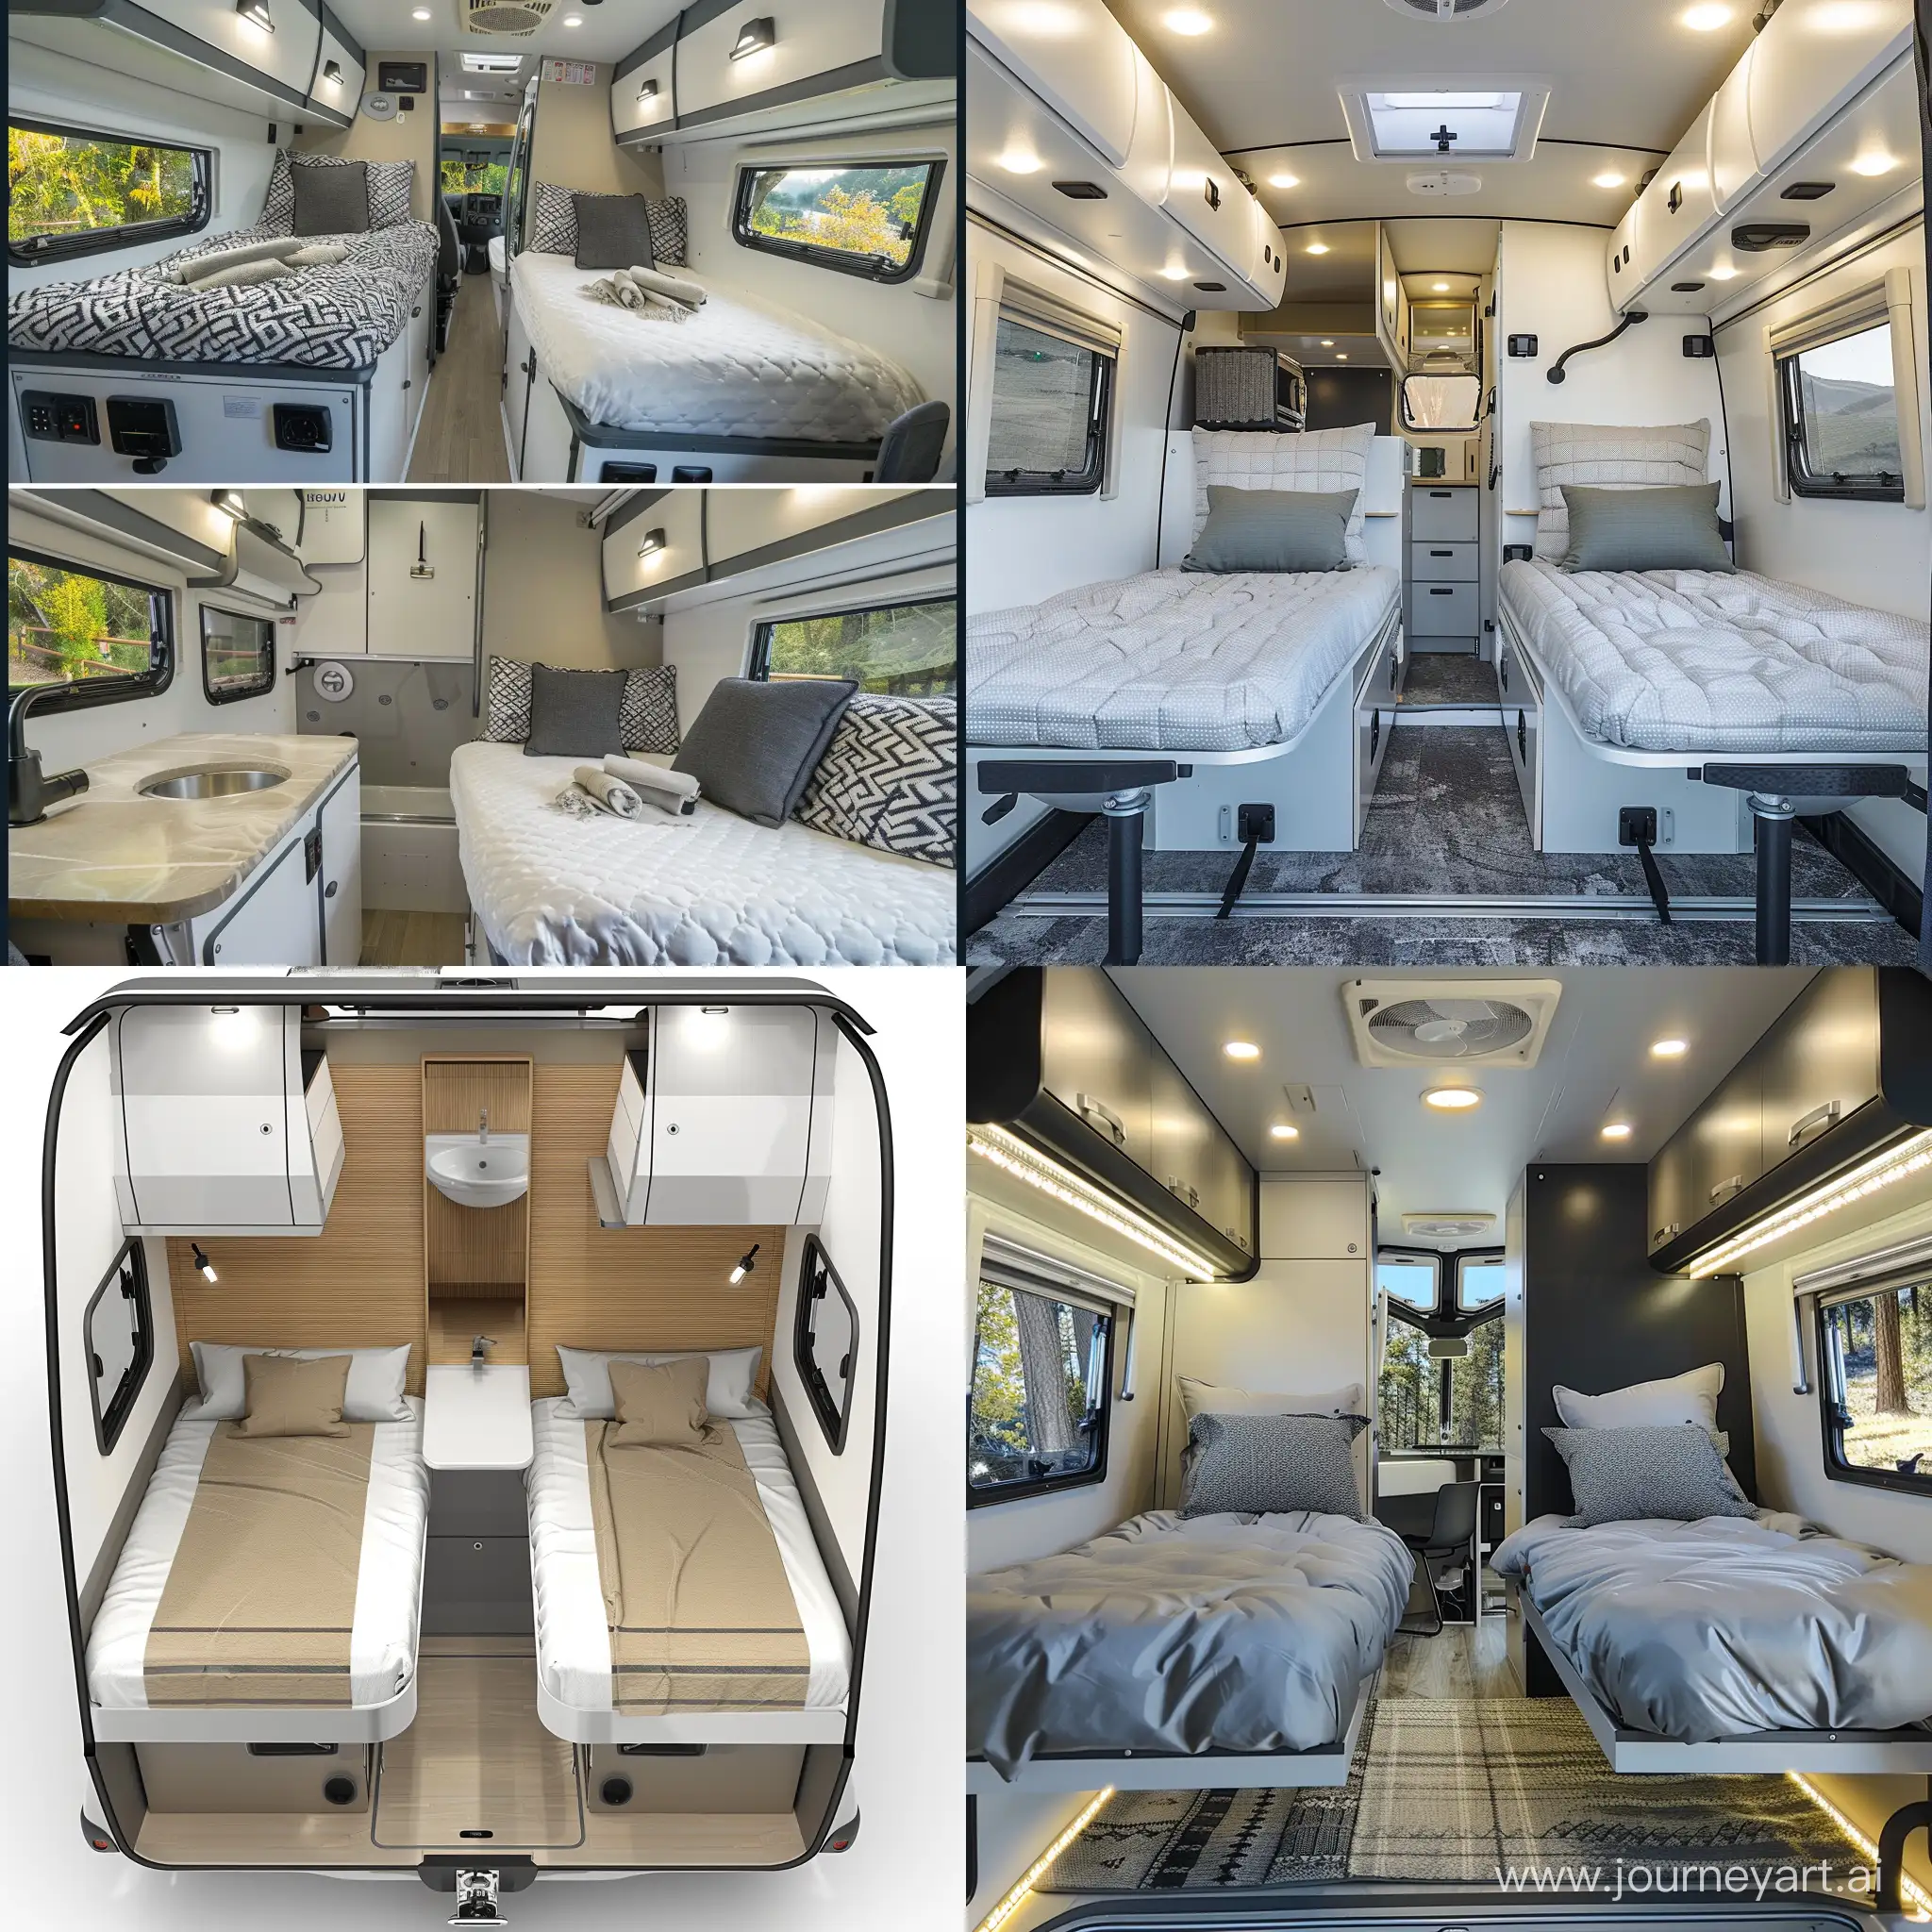 Luxurious-Isuzu-NPS-Caravan-with-Two-Beds-Bathroom-and-Dining-Area